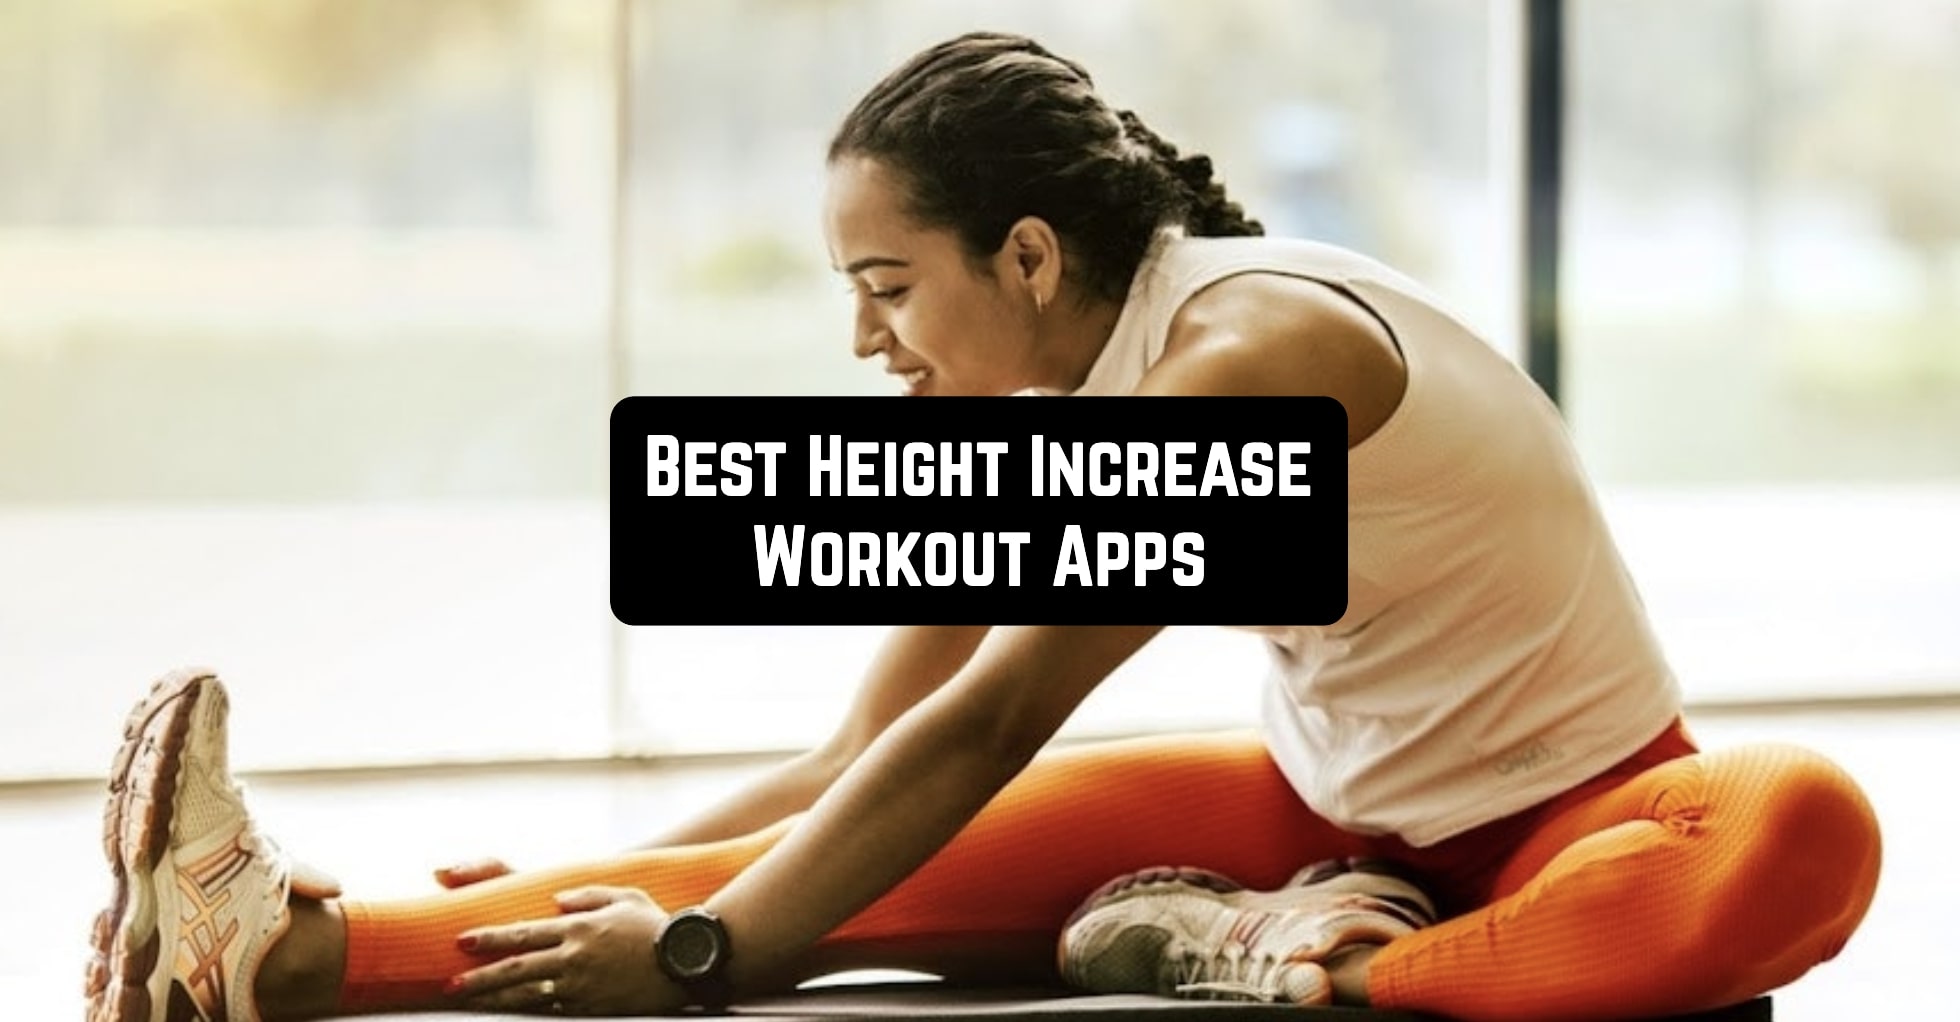 Best-Height-Increase-Workout-Apps